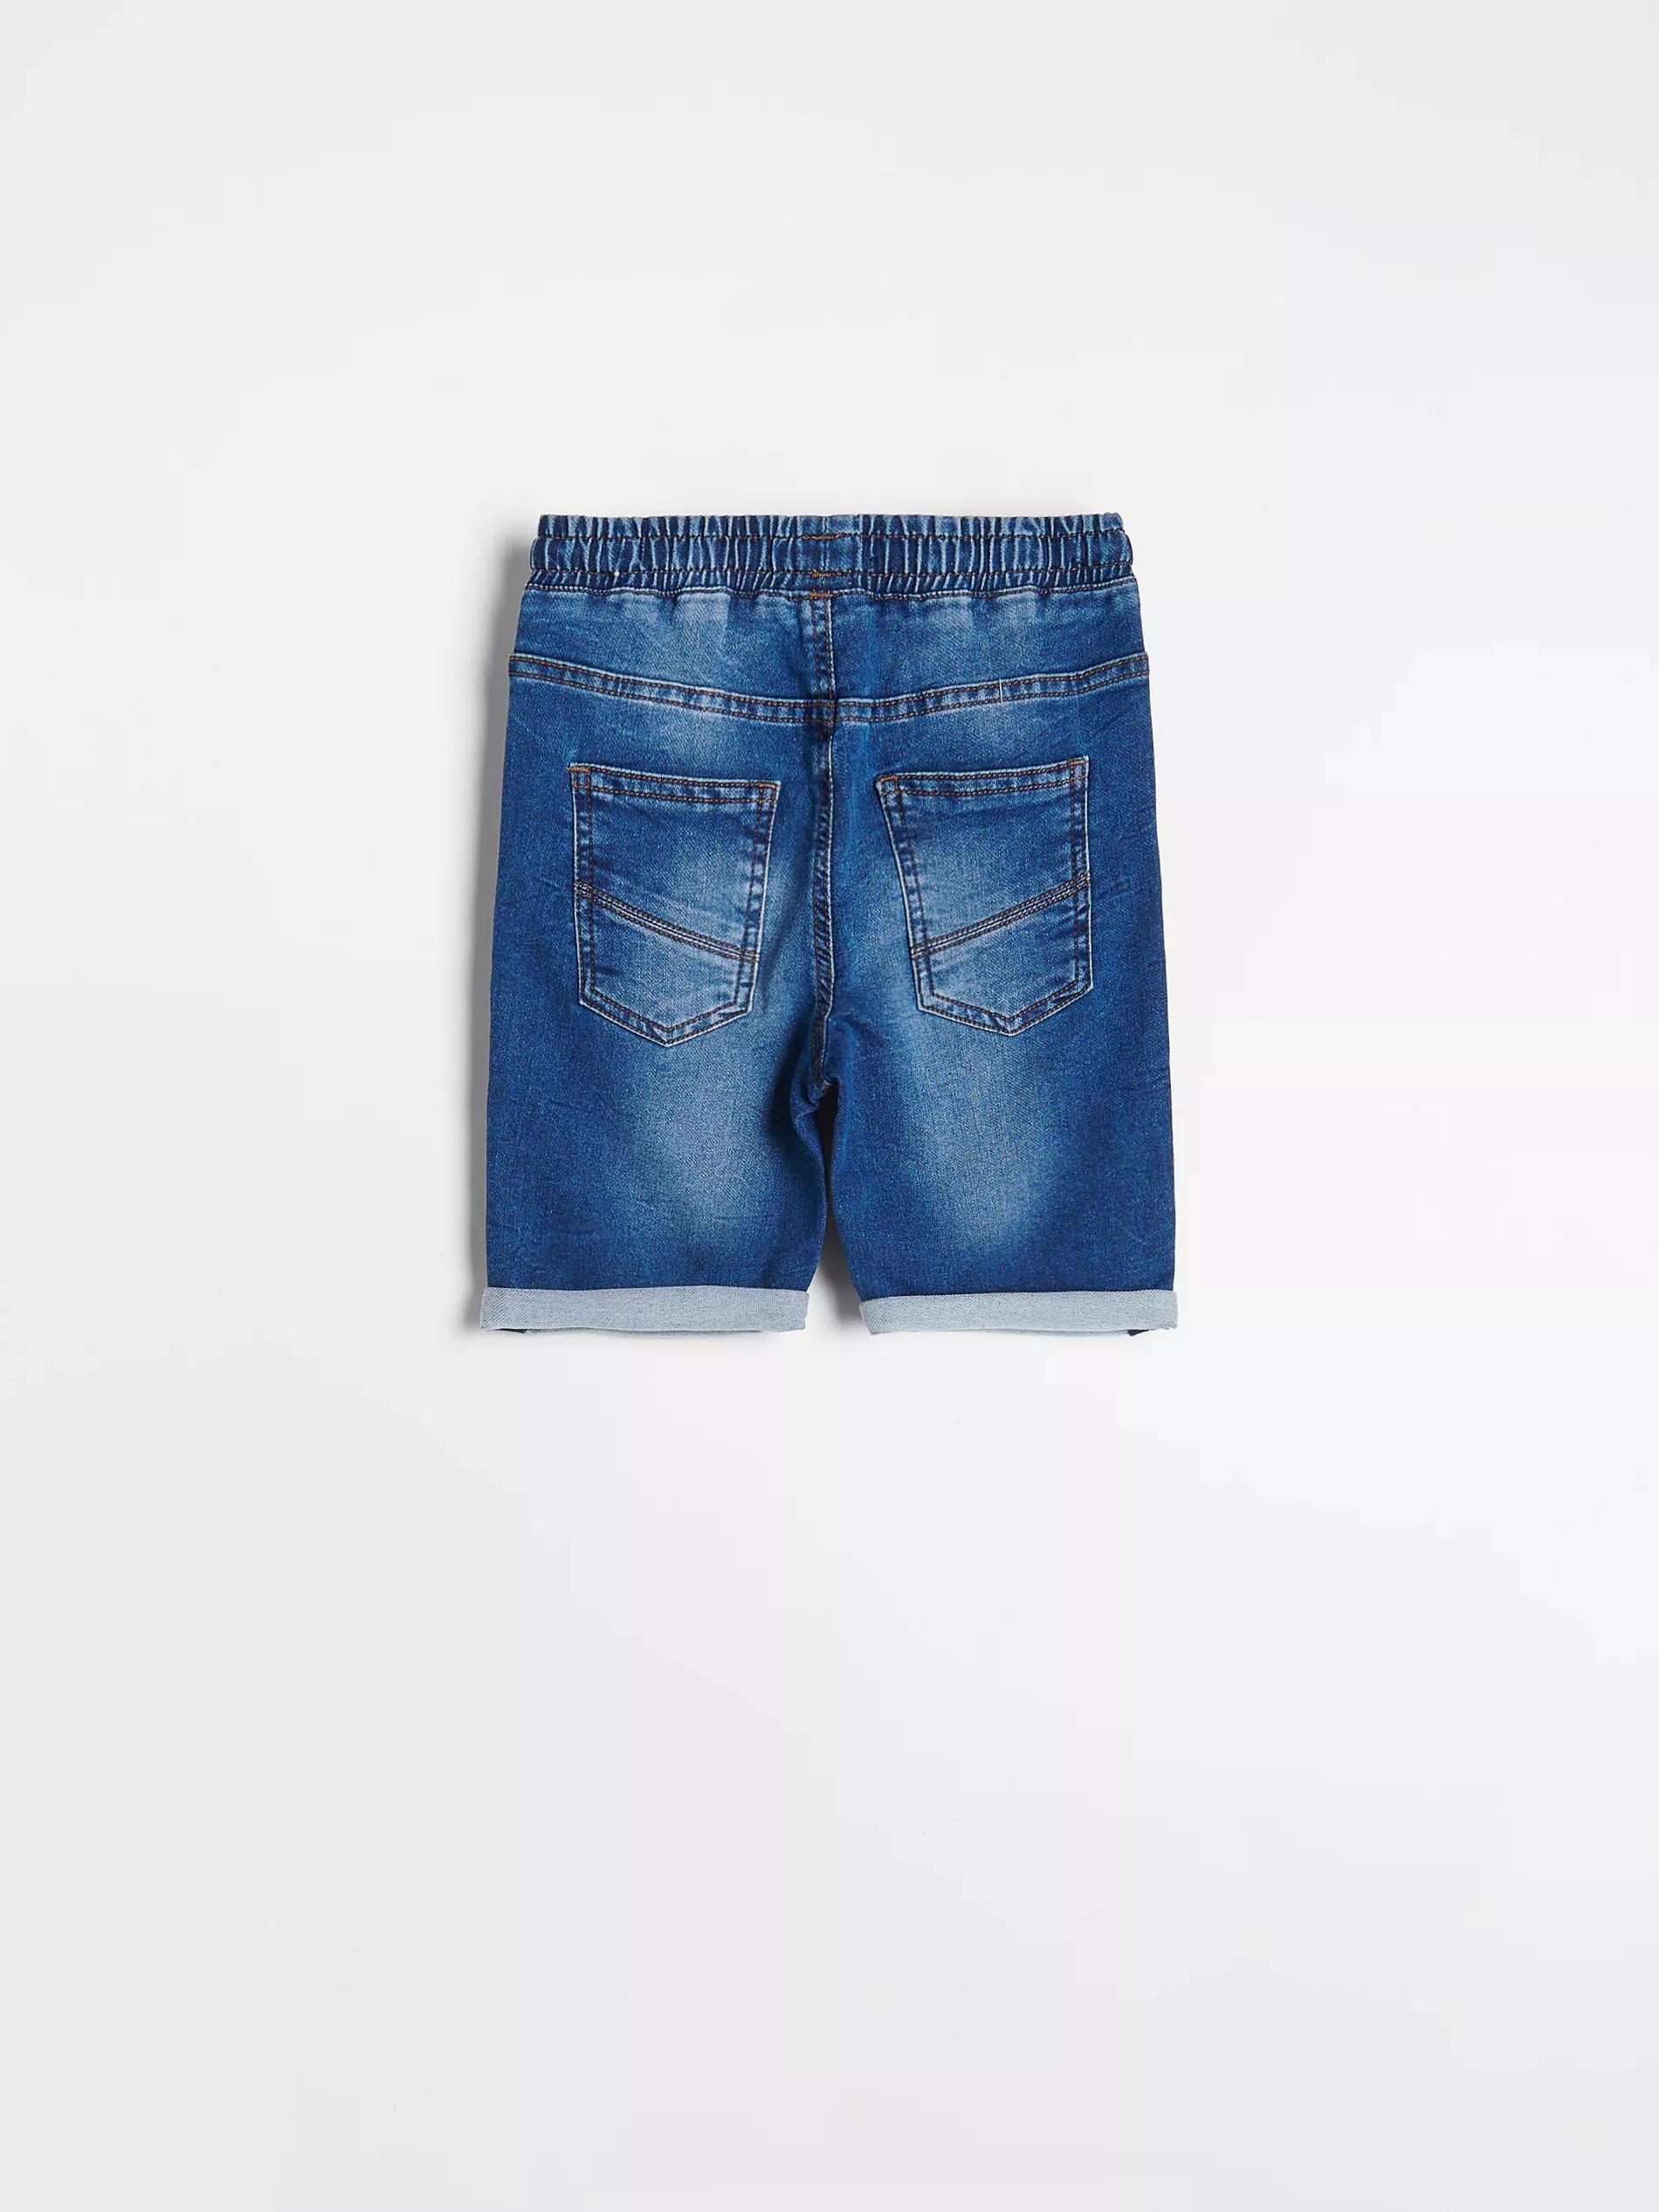 Reserved - Blue Denim Shorts With Wash Effect, Kids Boys